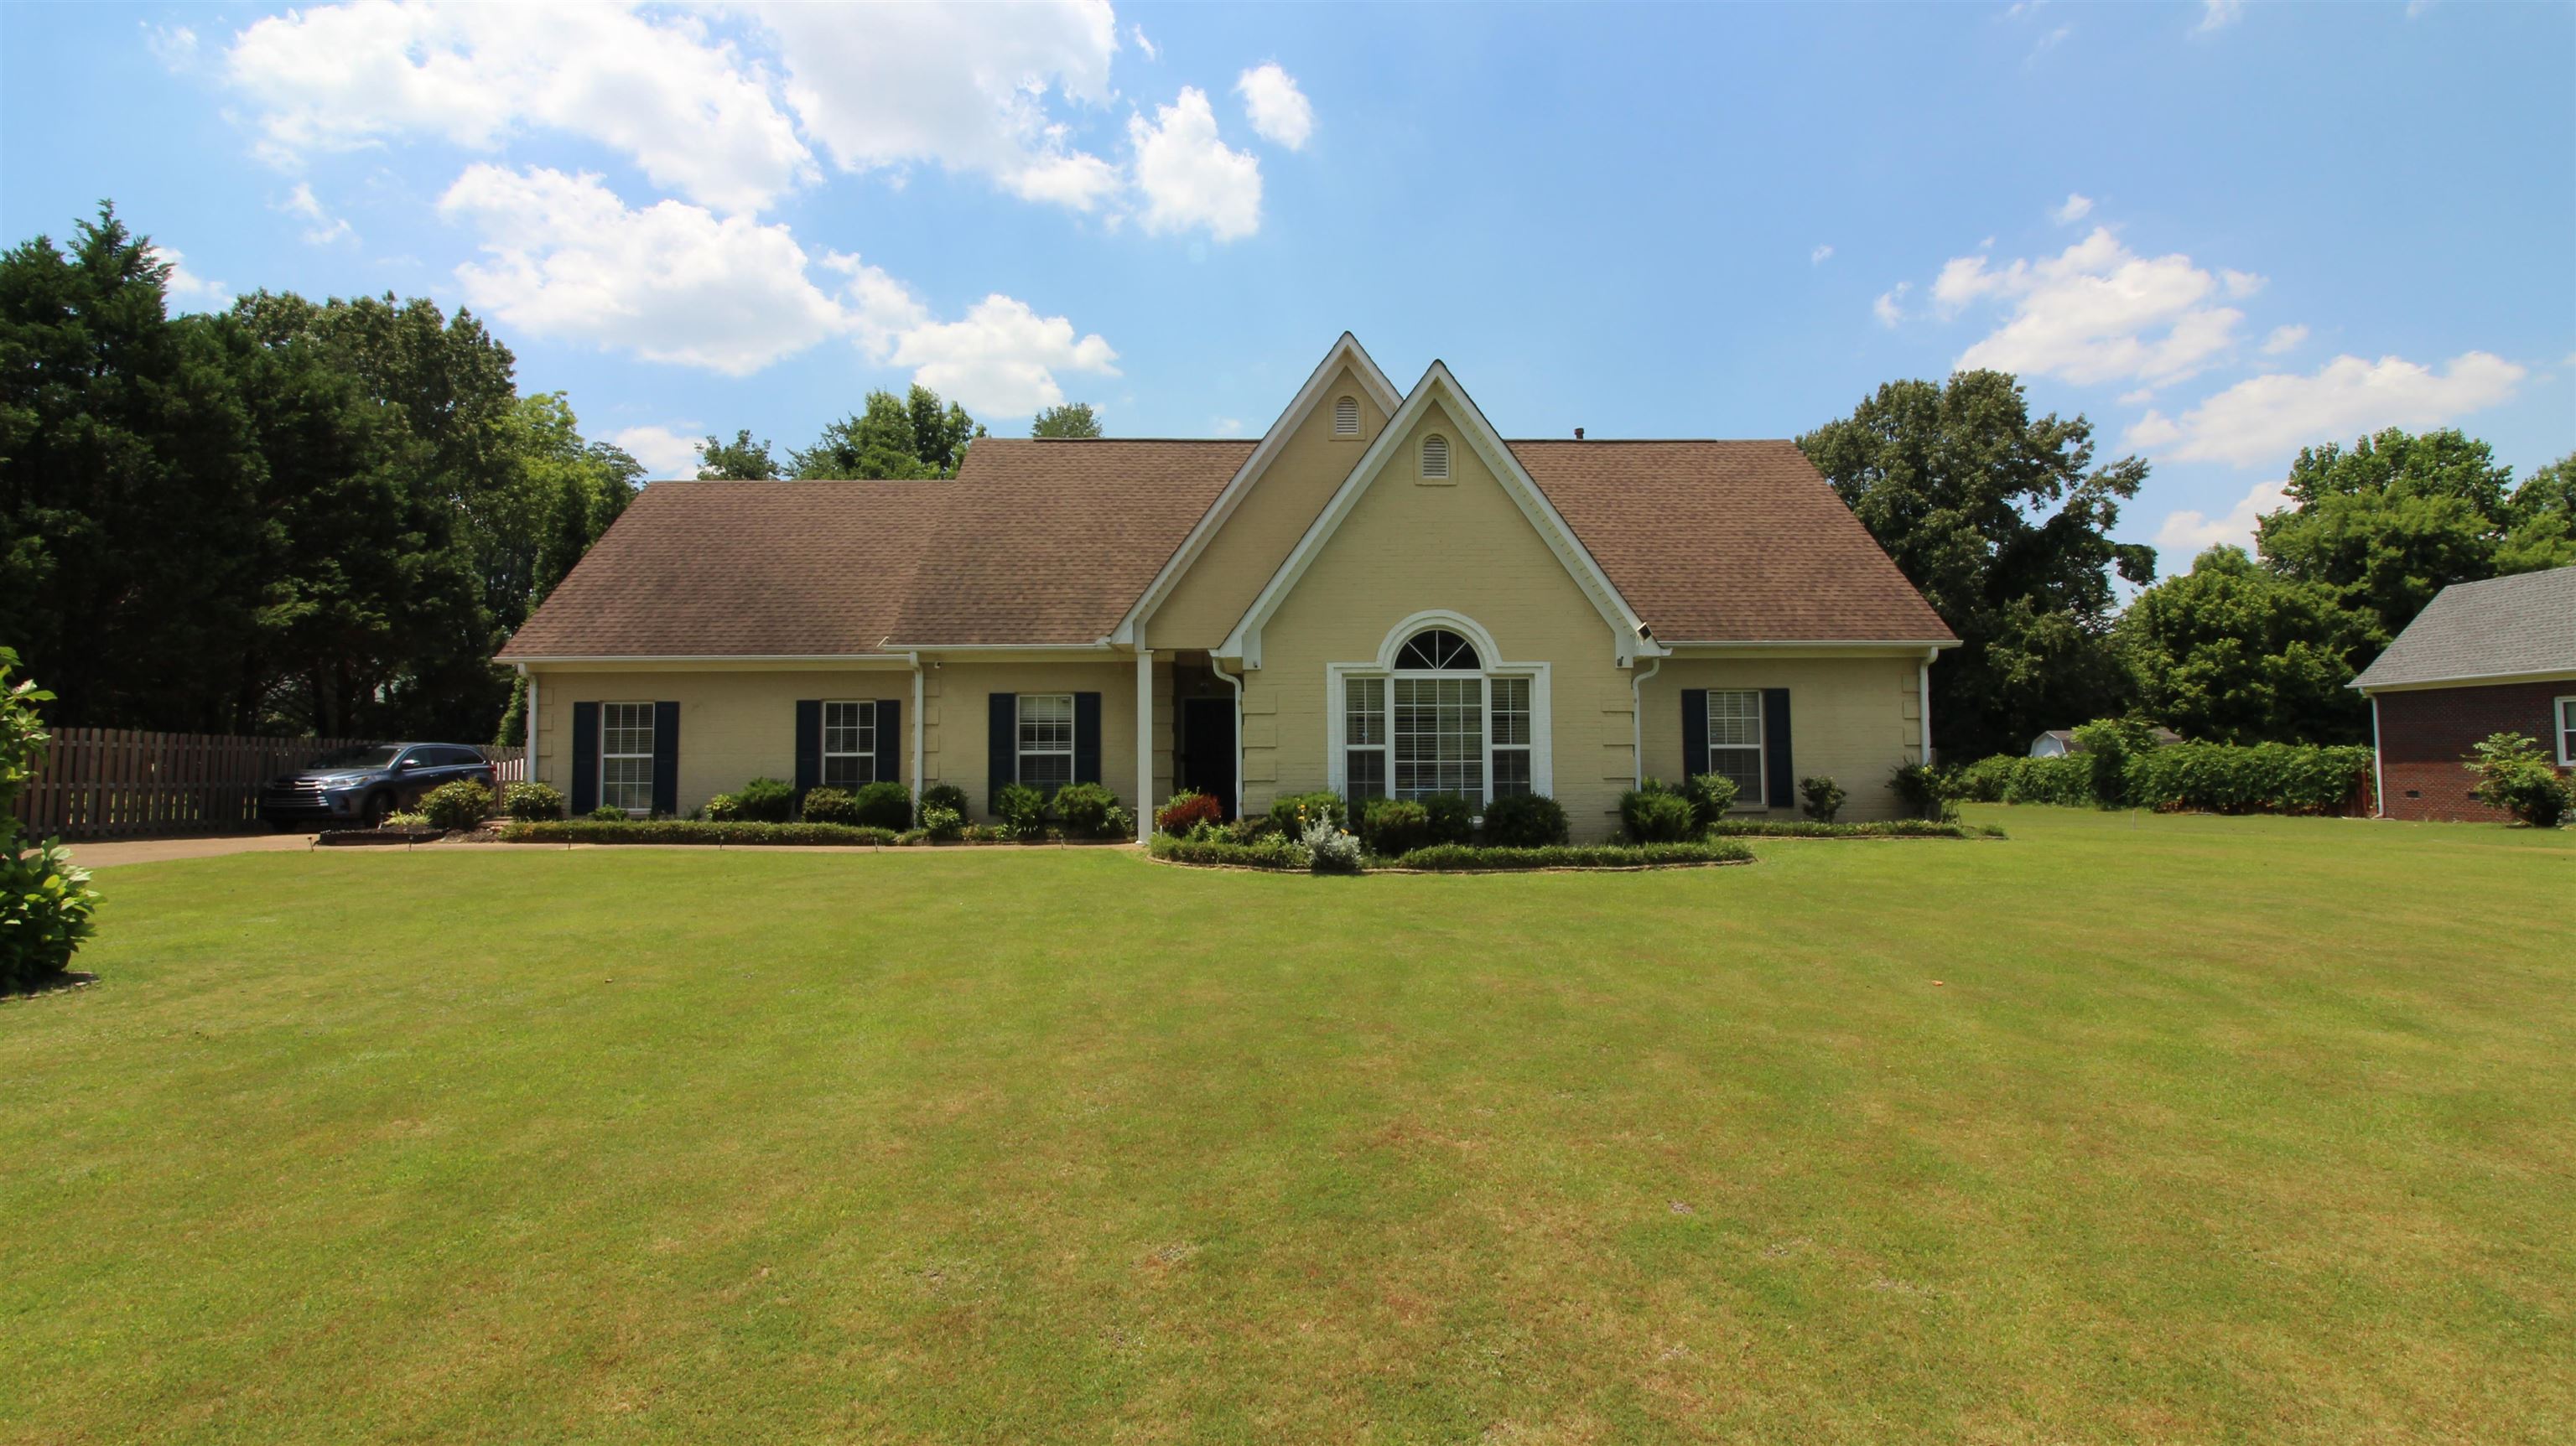 49 Sommersby Drive, Jackson, TN 38305